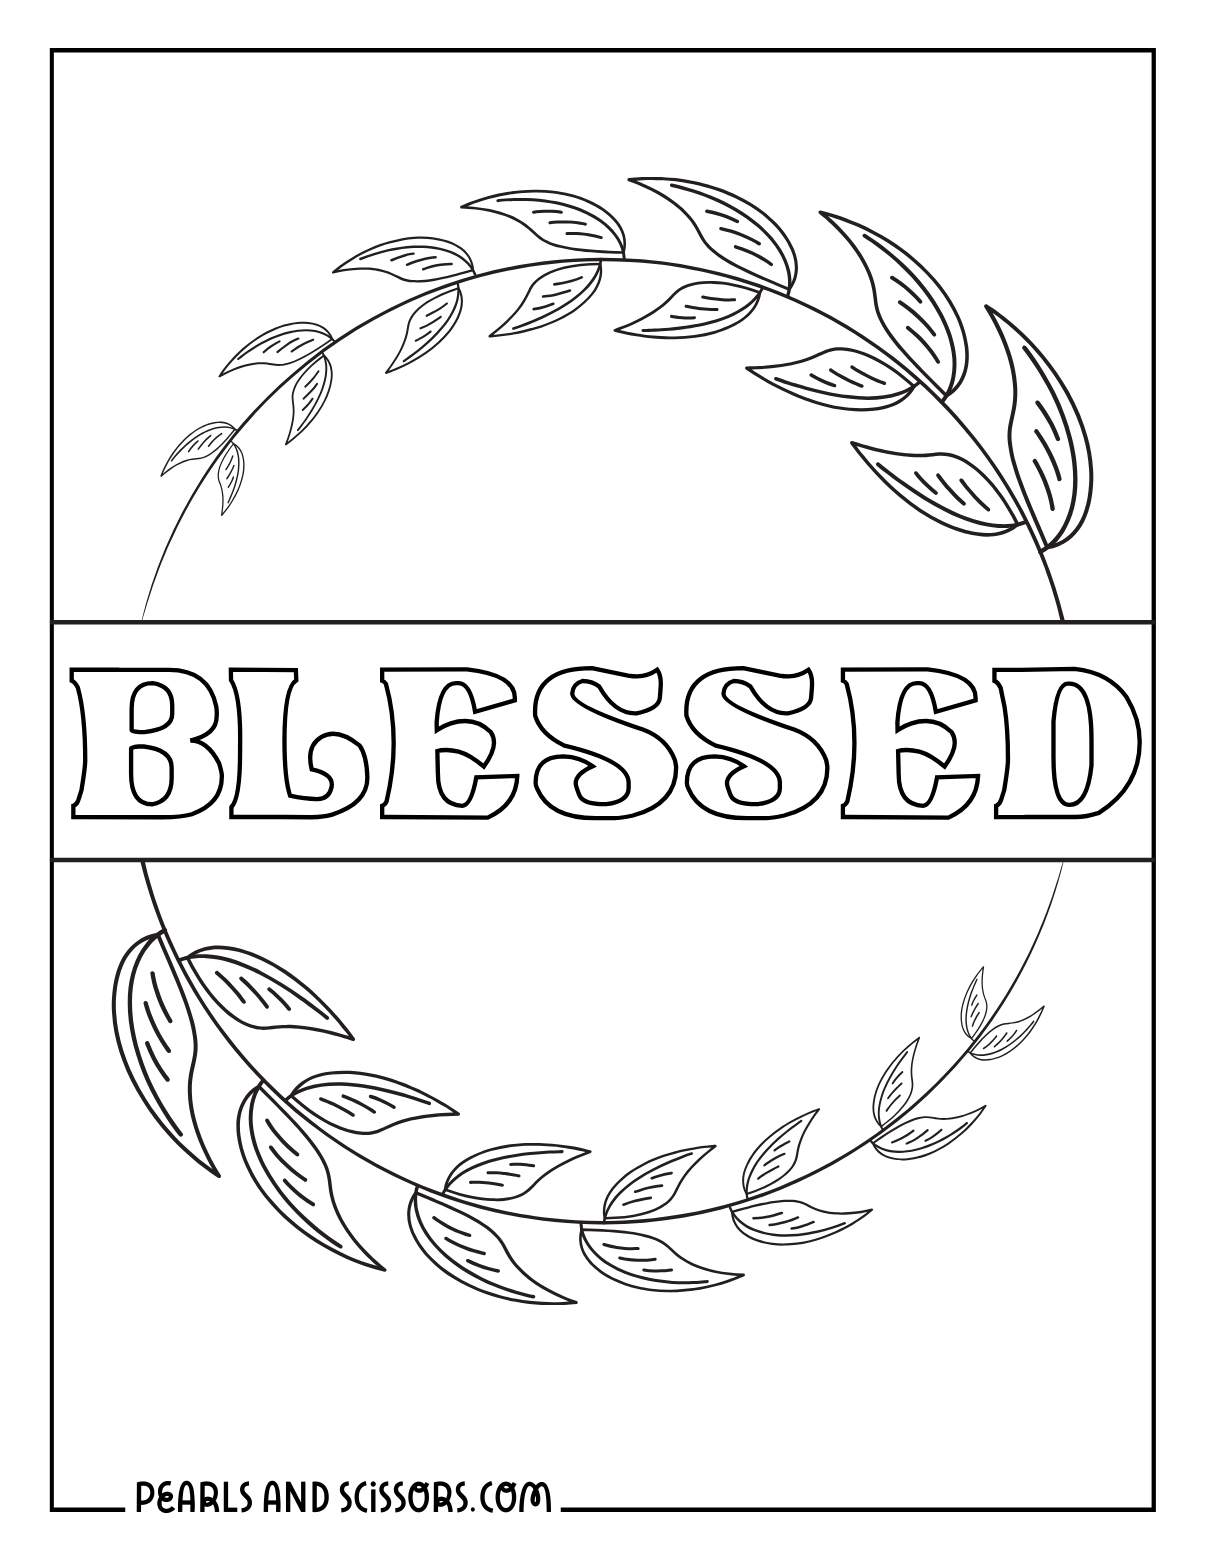 Blessed thanksgiving holiday coloring page.